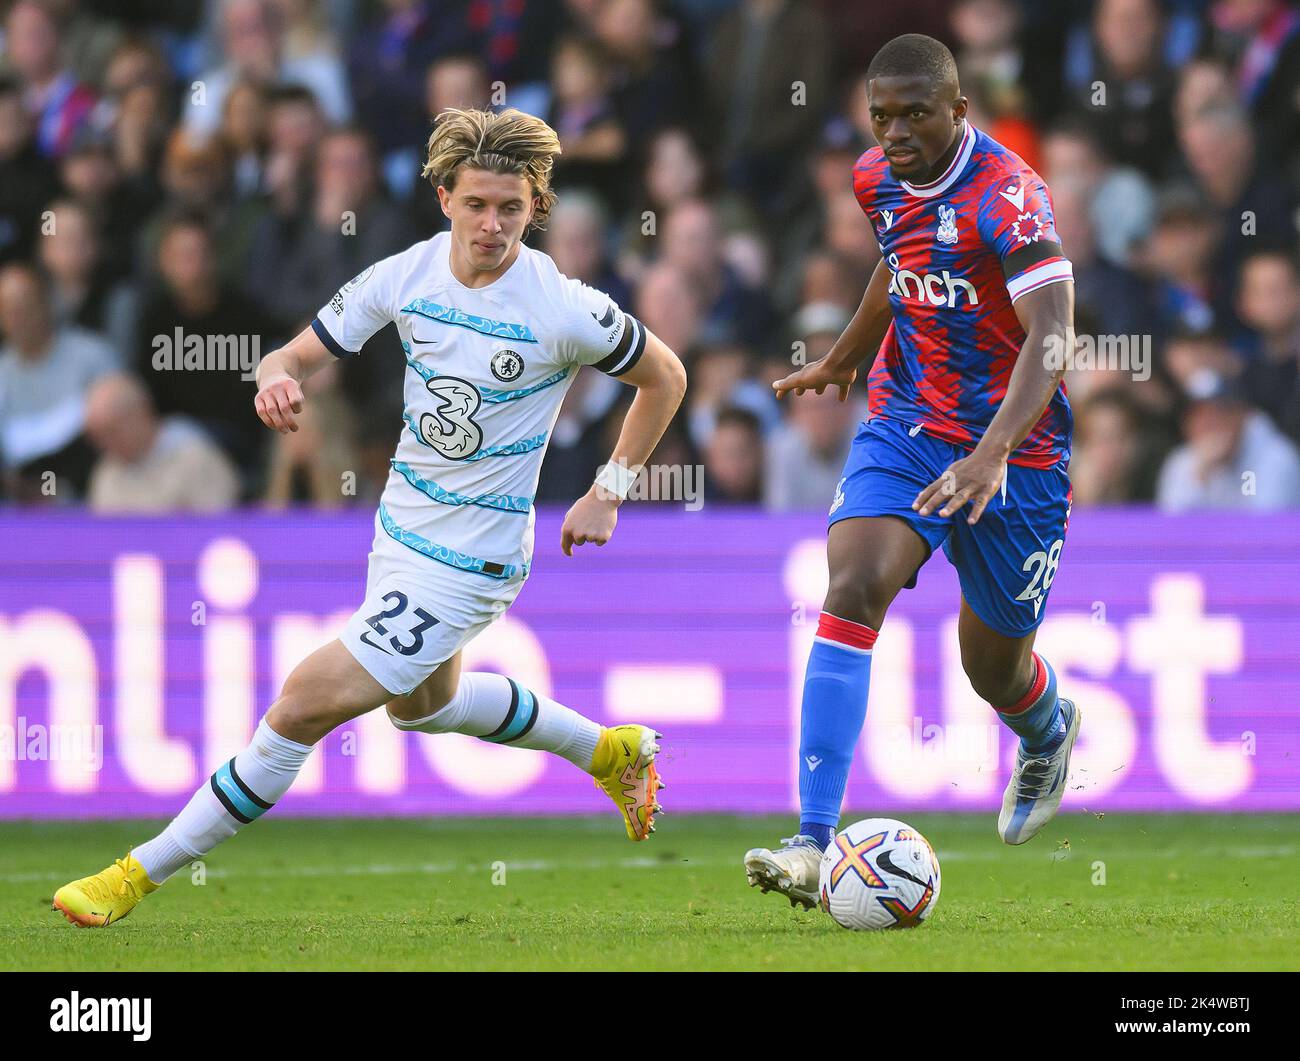 01 Oct 2022 - Crystal Palace v Chelsea - Premier League - Selhurst Park  Chelsea's Conor Gallagher and Crystal Palace's Cheick Doucoure during the Premier League match at Selhurst Park. Picture : Mark Pain / Alamy Live News Stock Photo